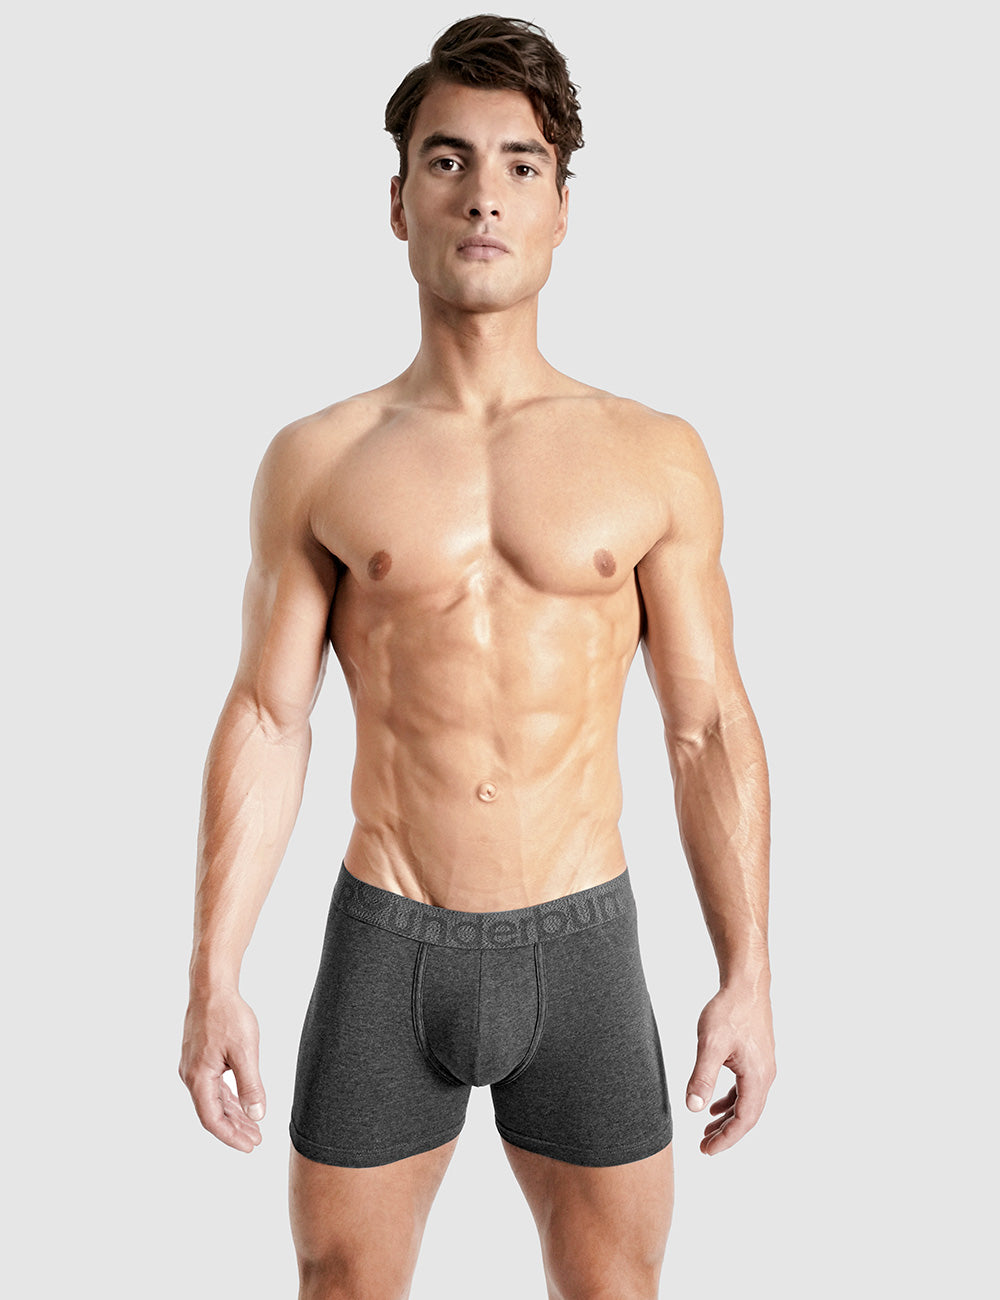 STEALTH Padded Boxer Brief